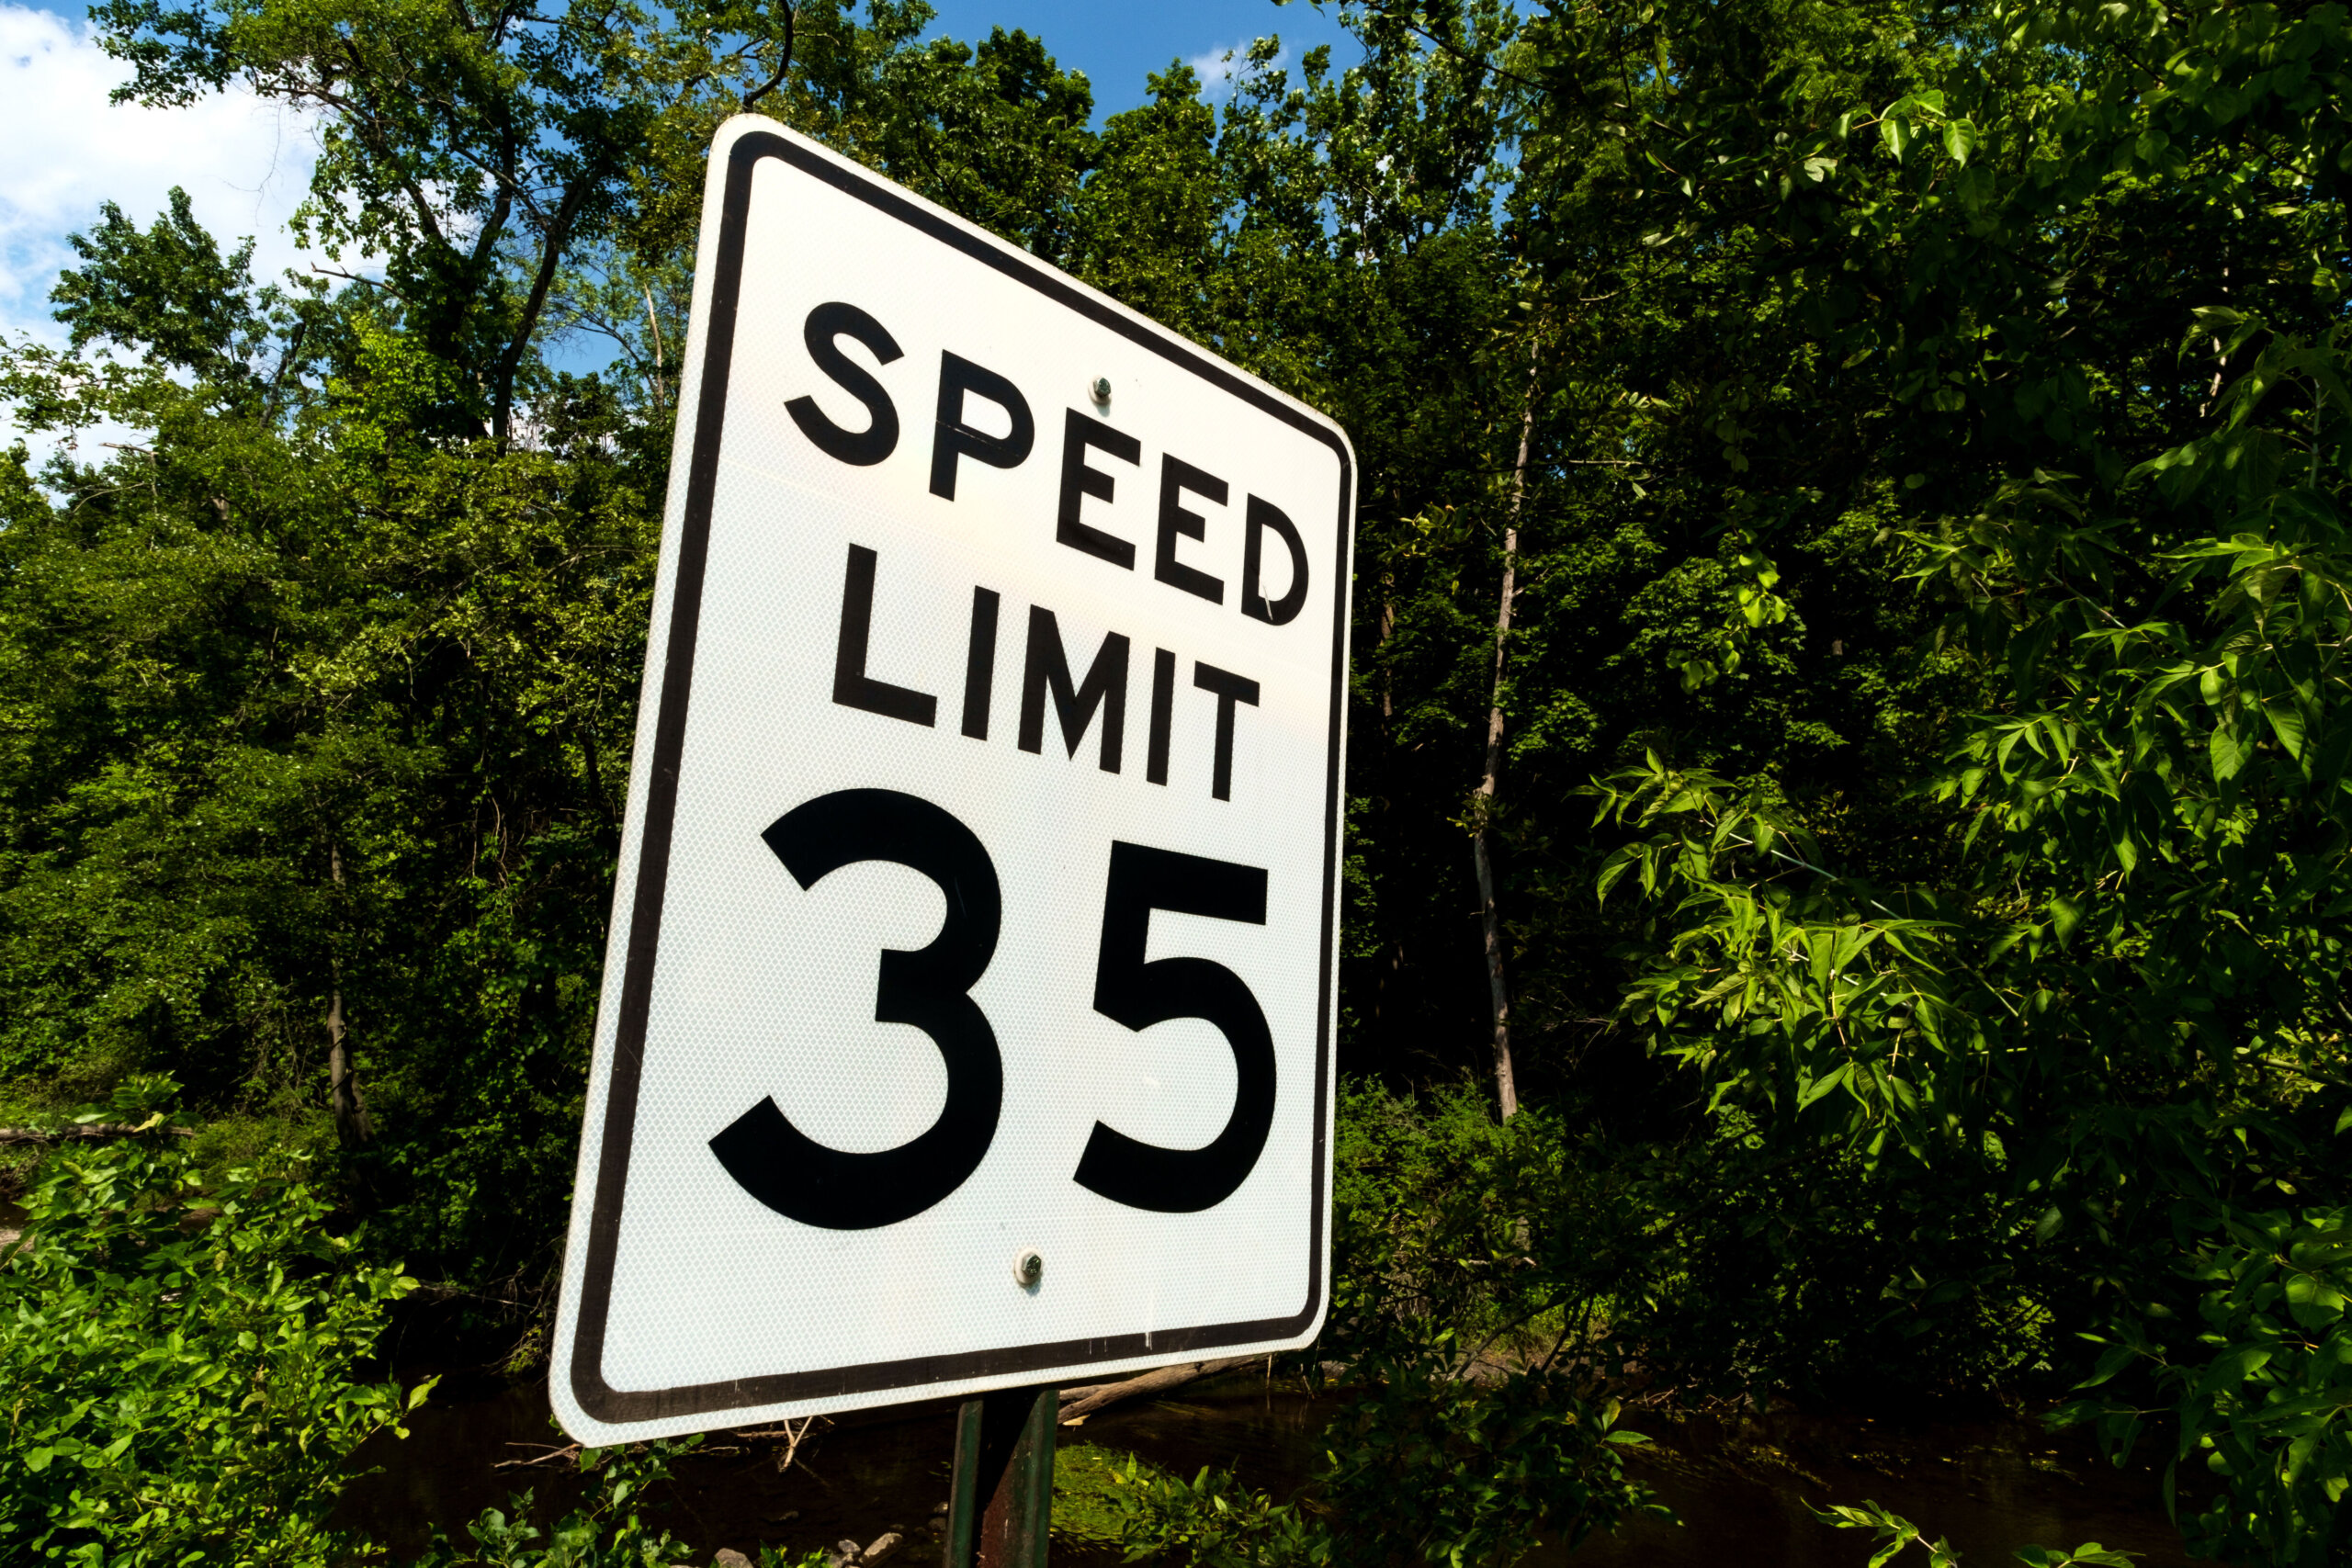 speed limit 35 road sign